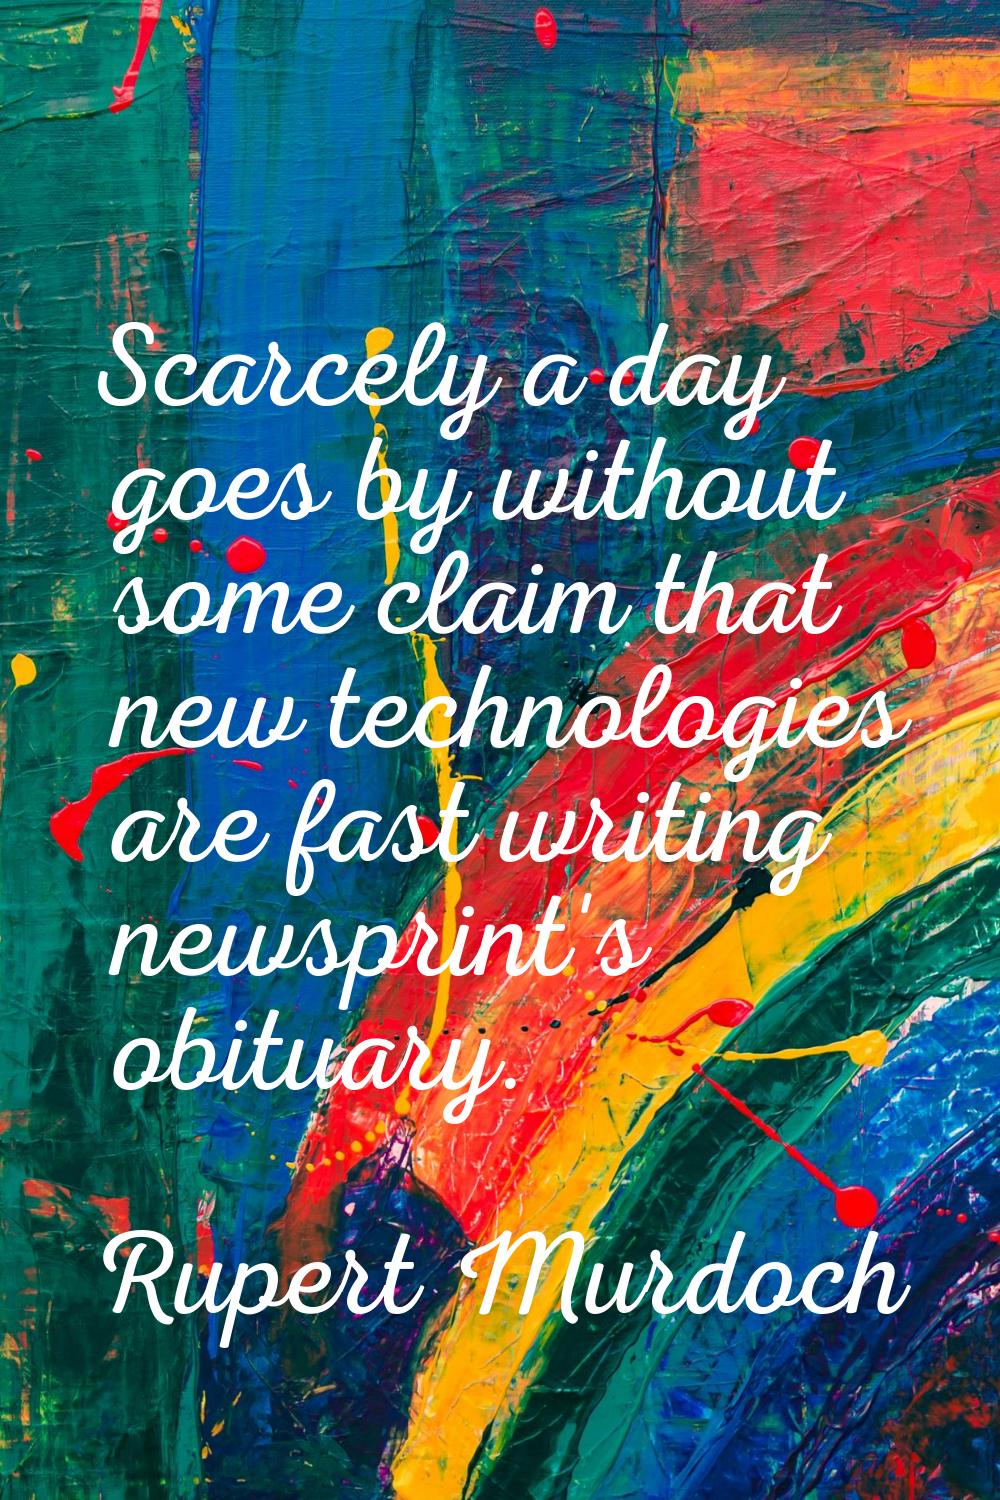 Scarcely a day goes by without some claim that new technologies are fast writing newsprint's obitua